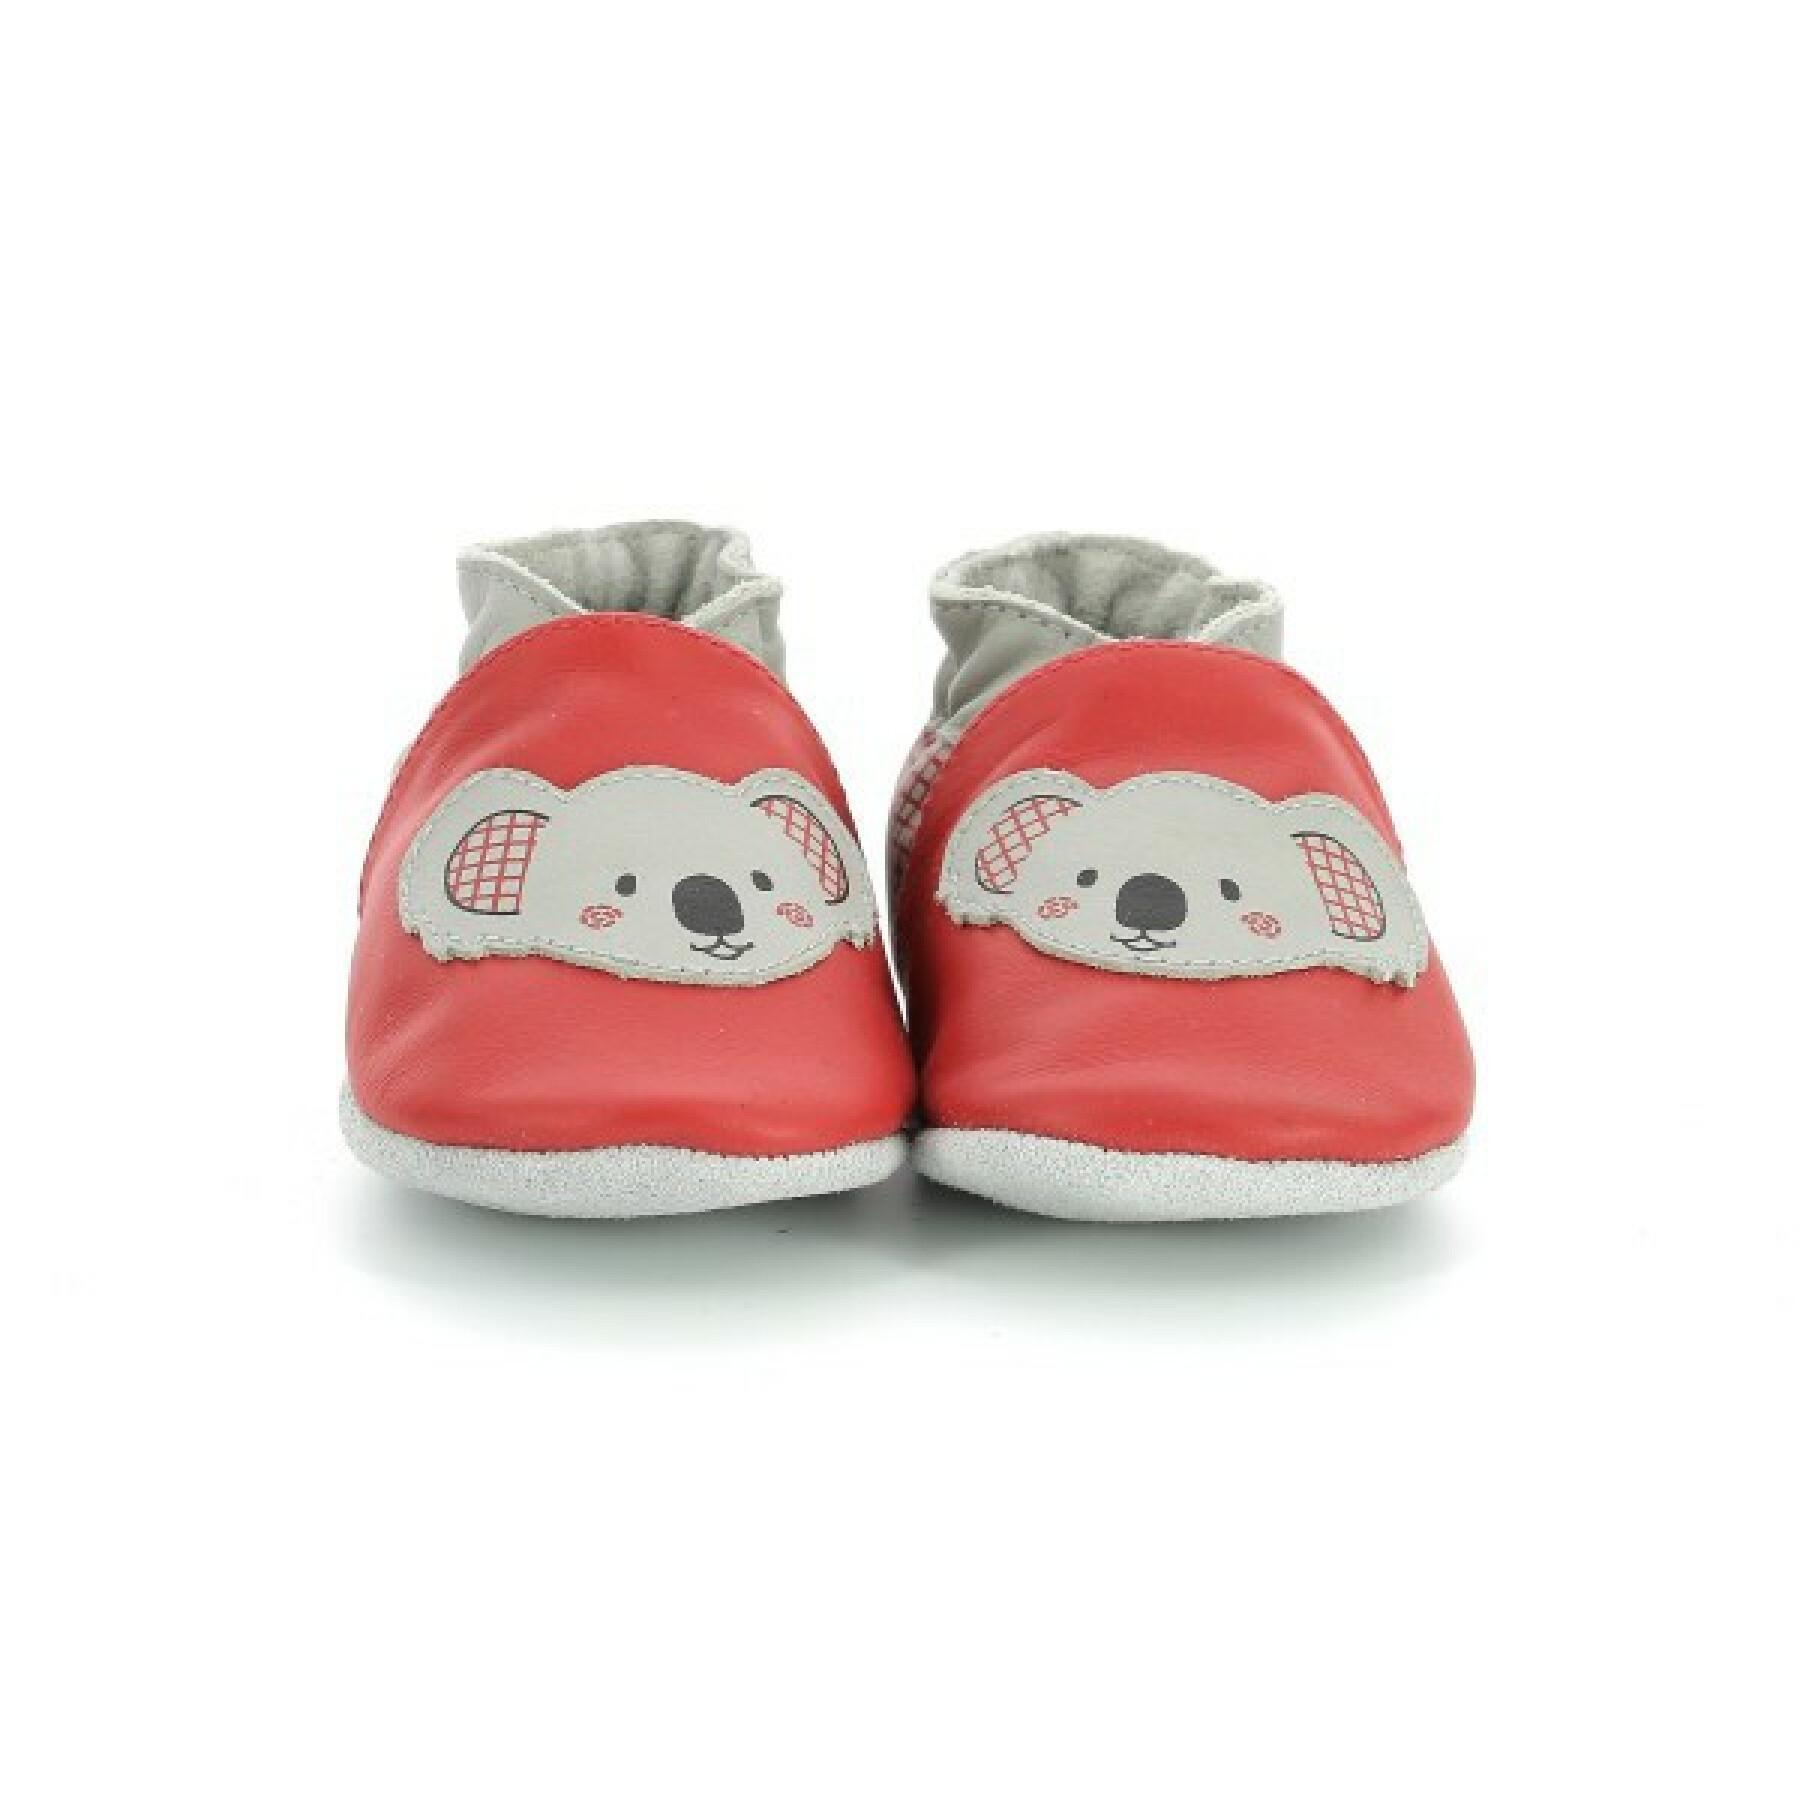 Children's slippers Robeez to look at